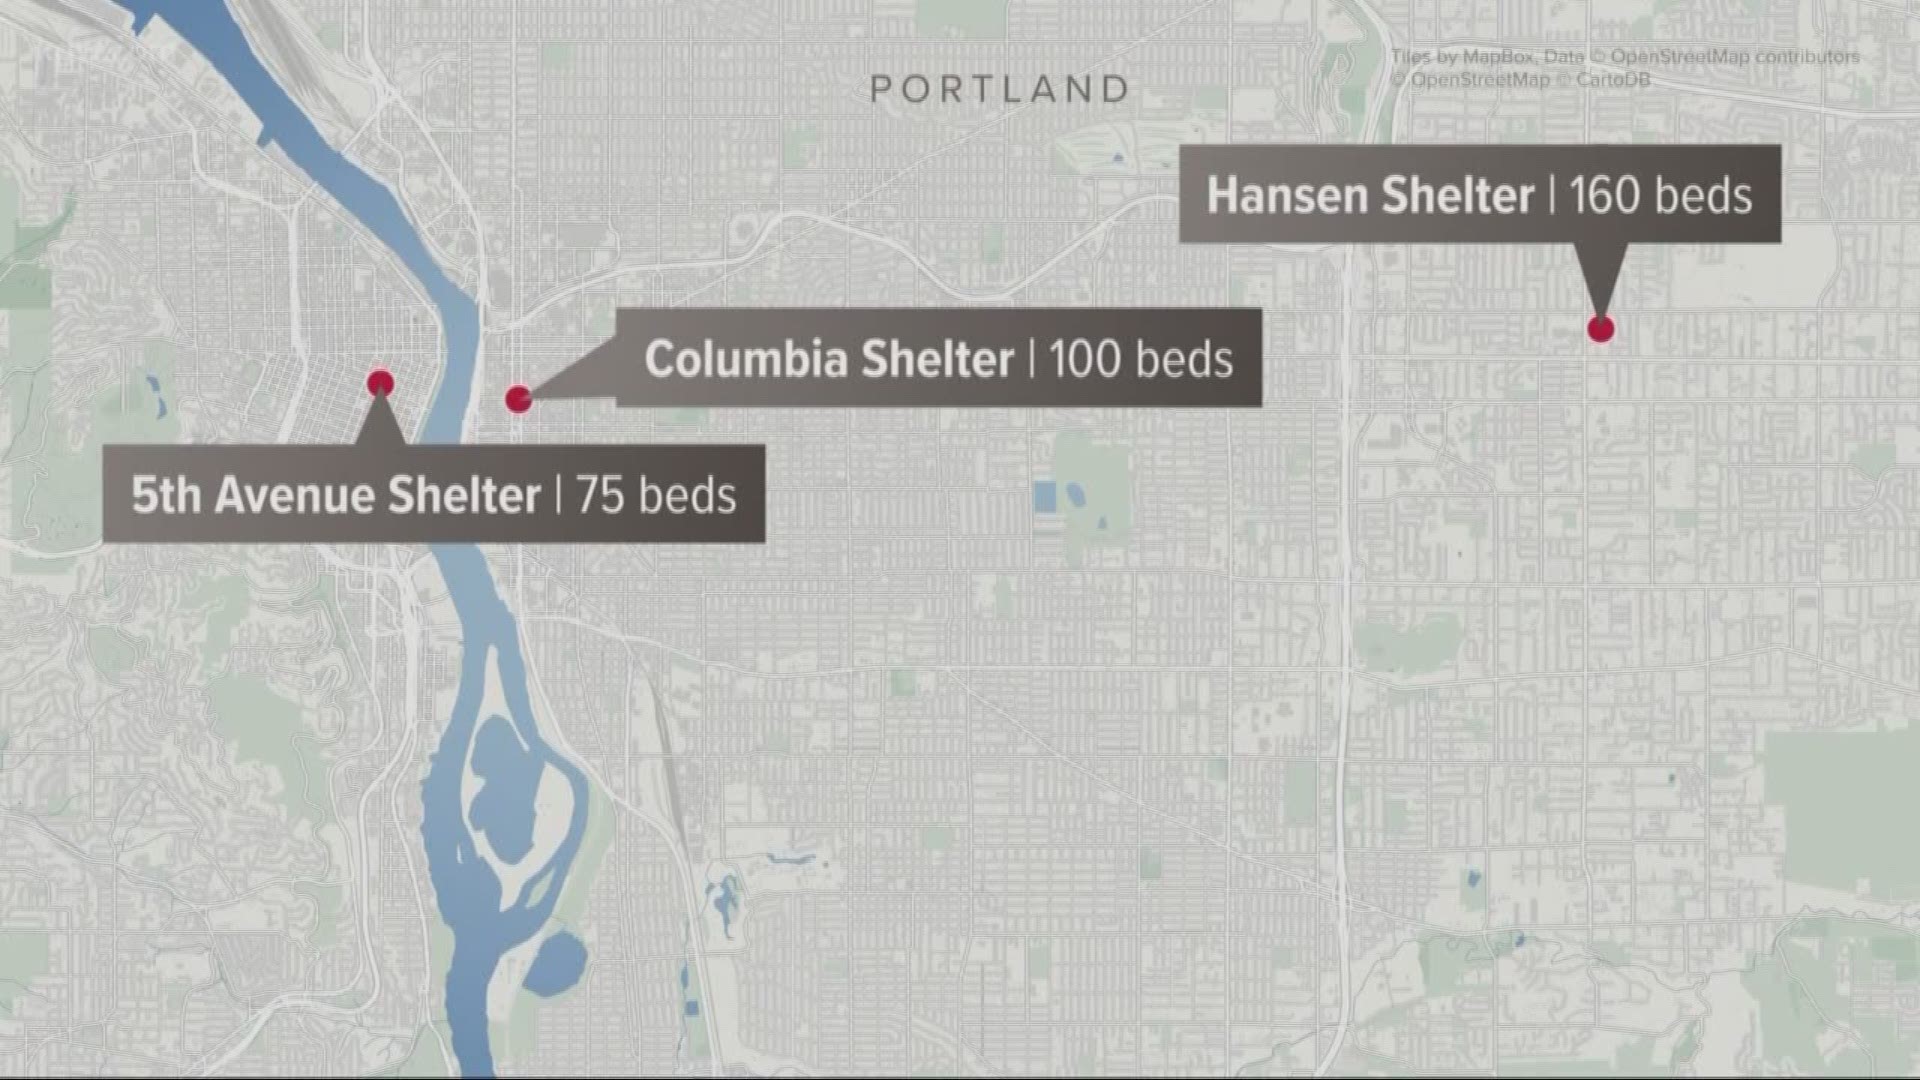 3 Portland homeless shelters will close by June.